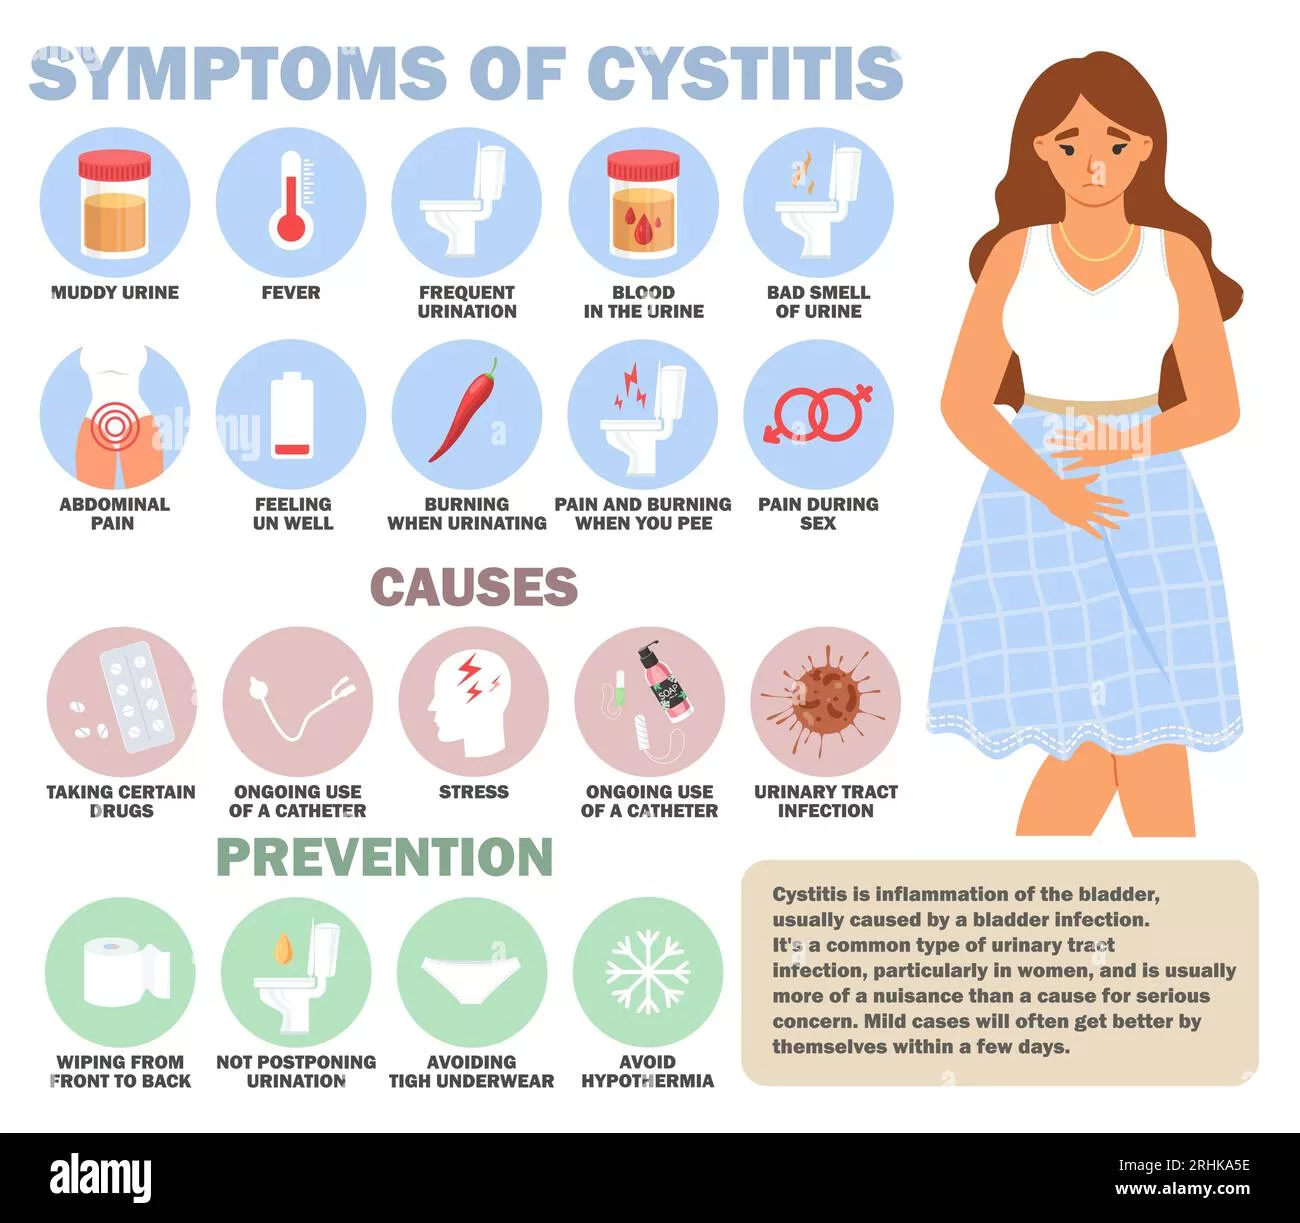 Various Characteristics of Cystitis and Treatment Methods You Should Know